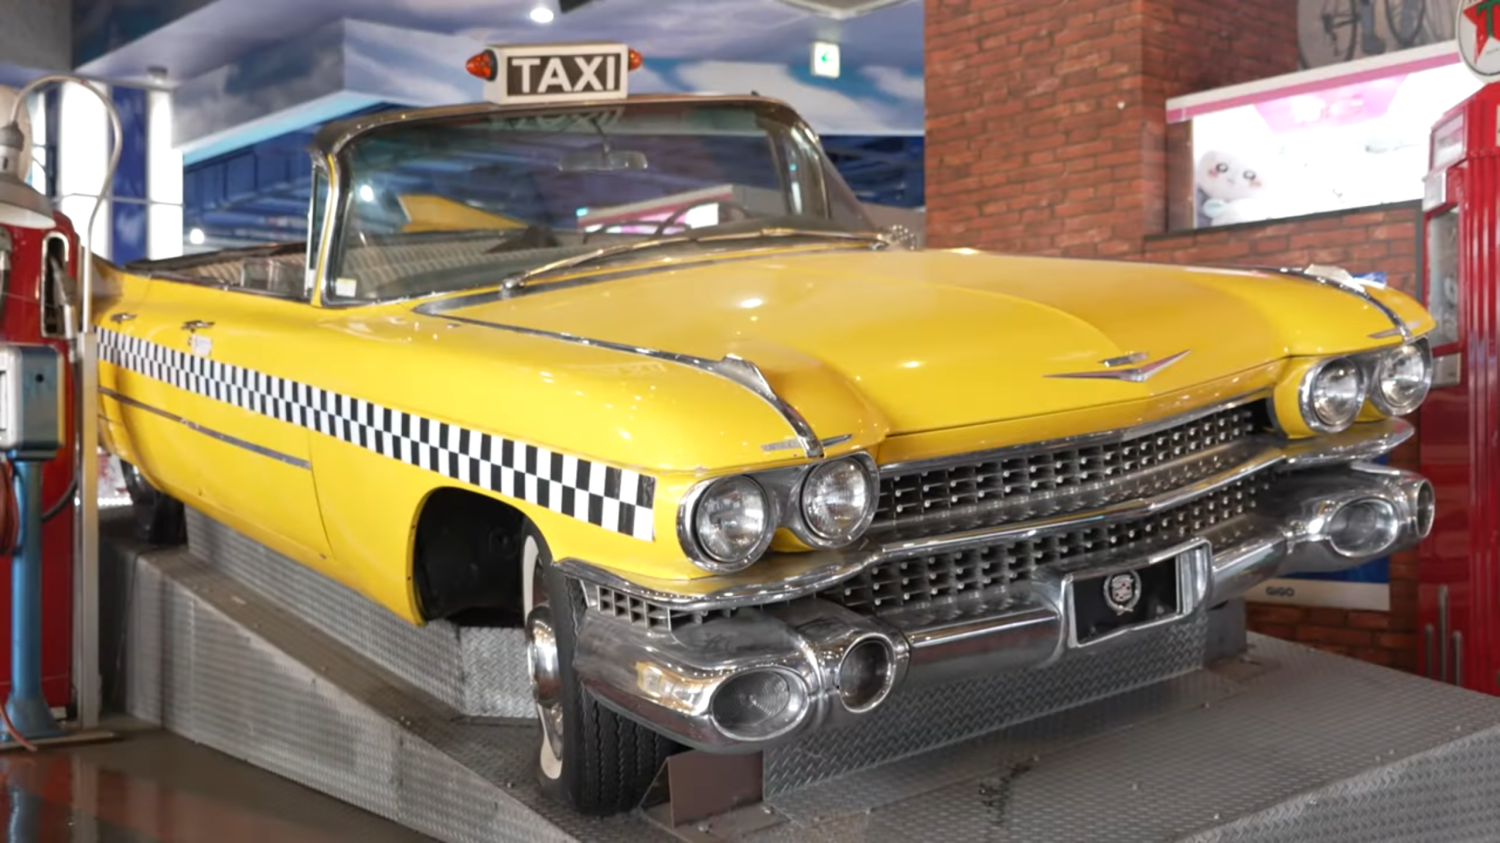 New Crazy Taxi has online multiplayer, big emphasis on freedom and chaos